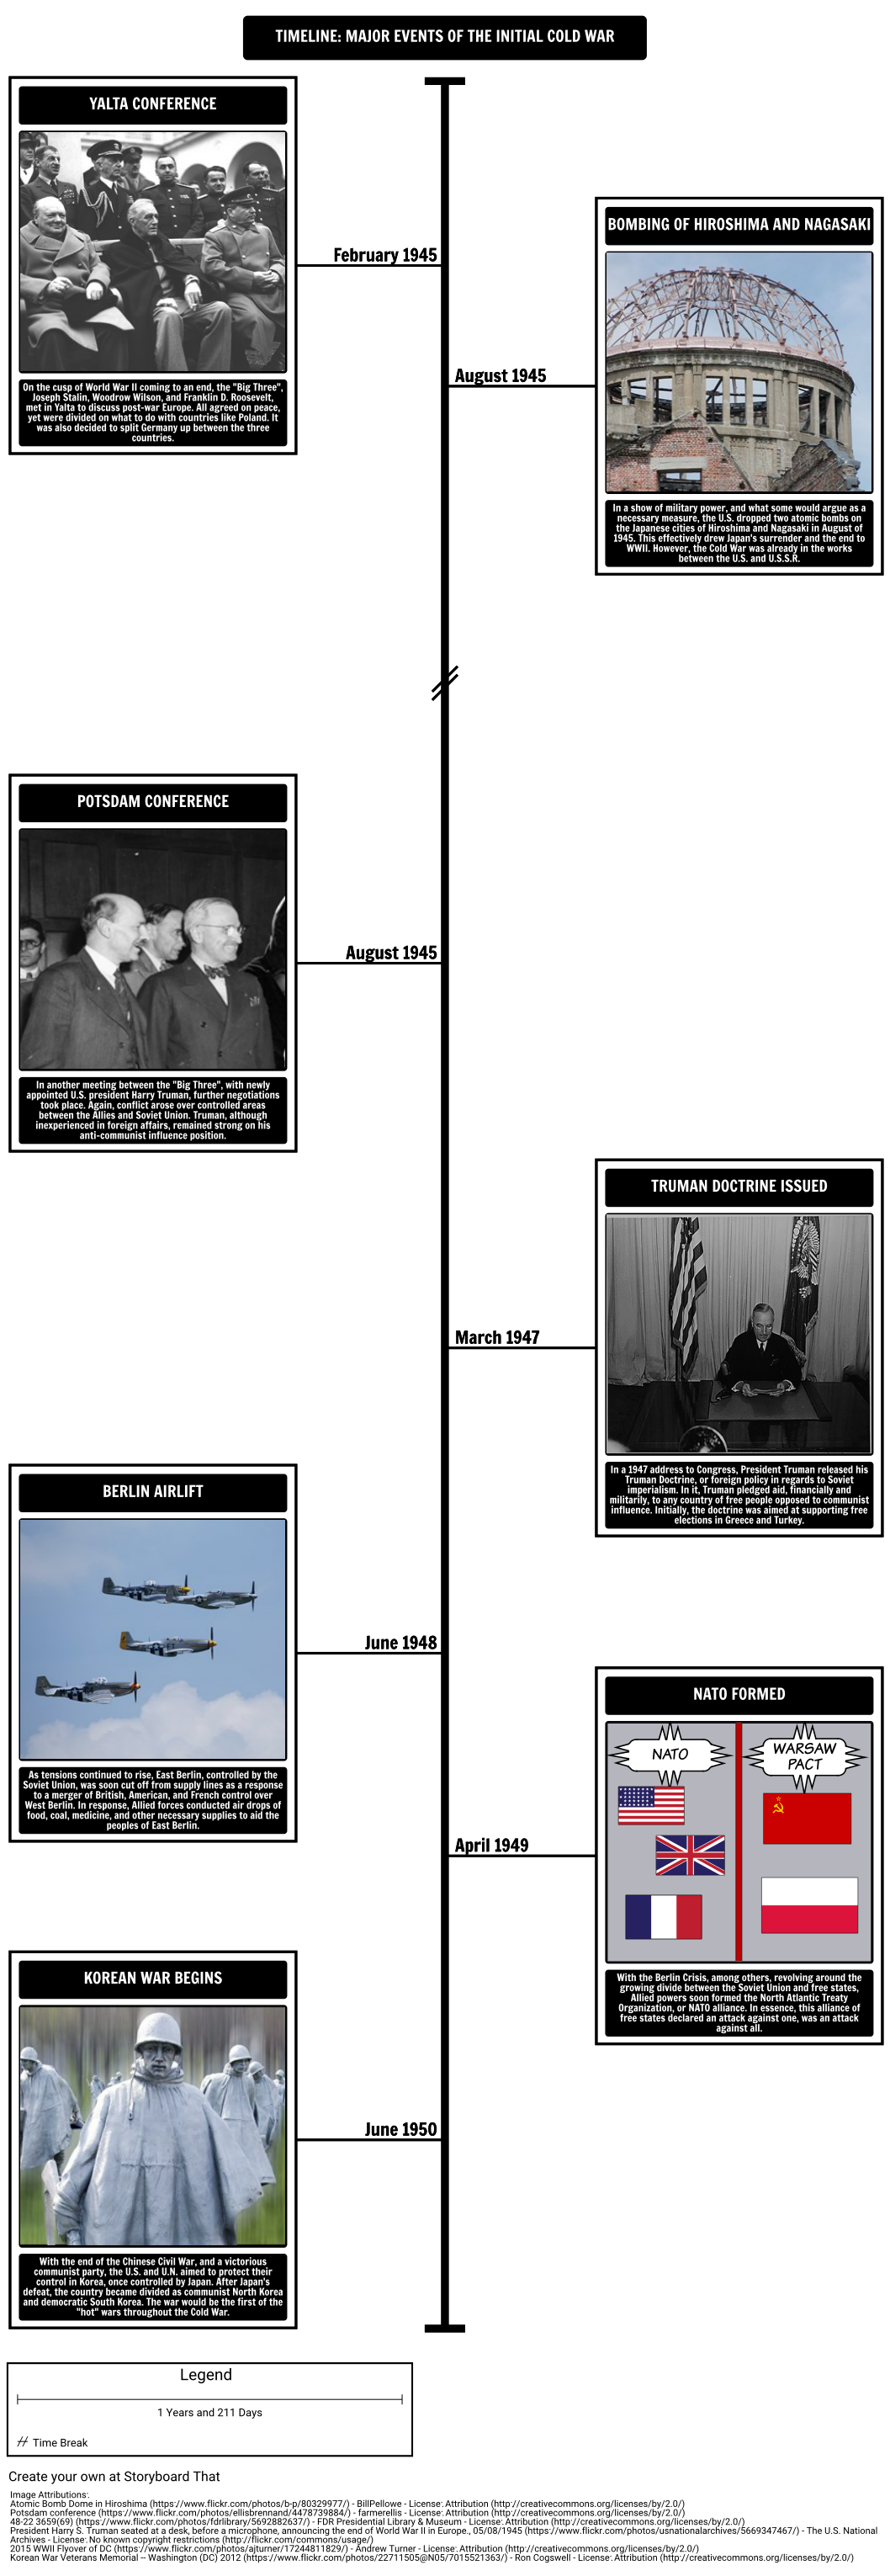 Timeline - Major Events of the Initial Cold War